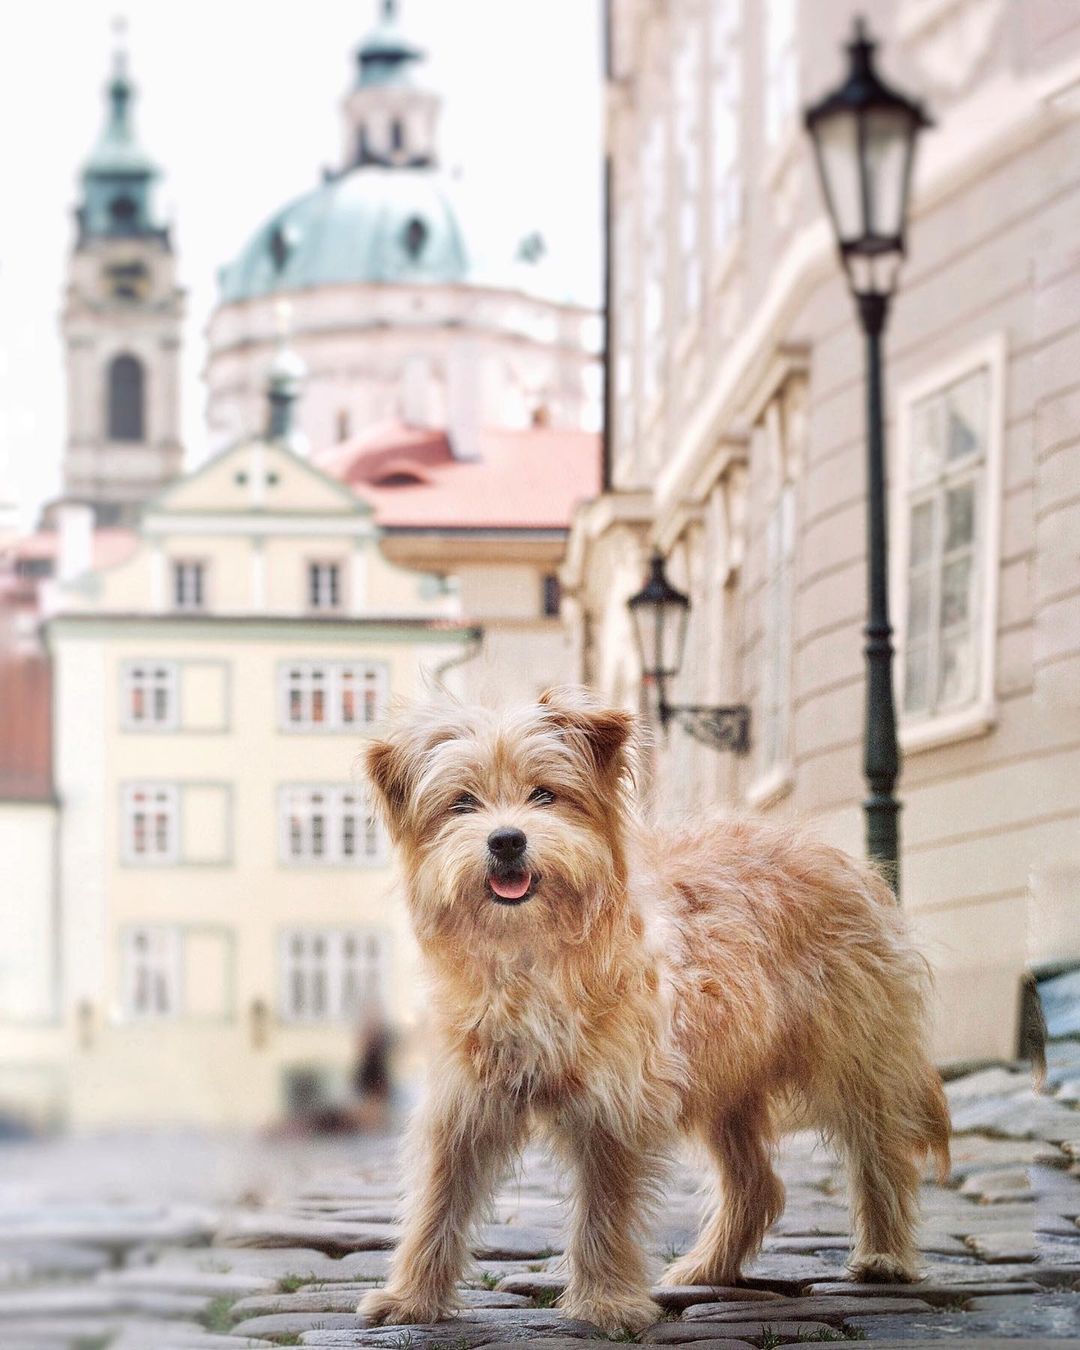 photo of dog named knut in the street